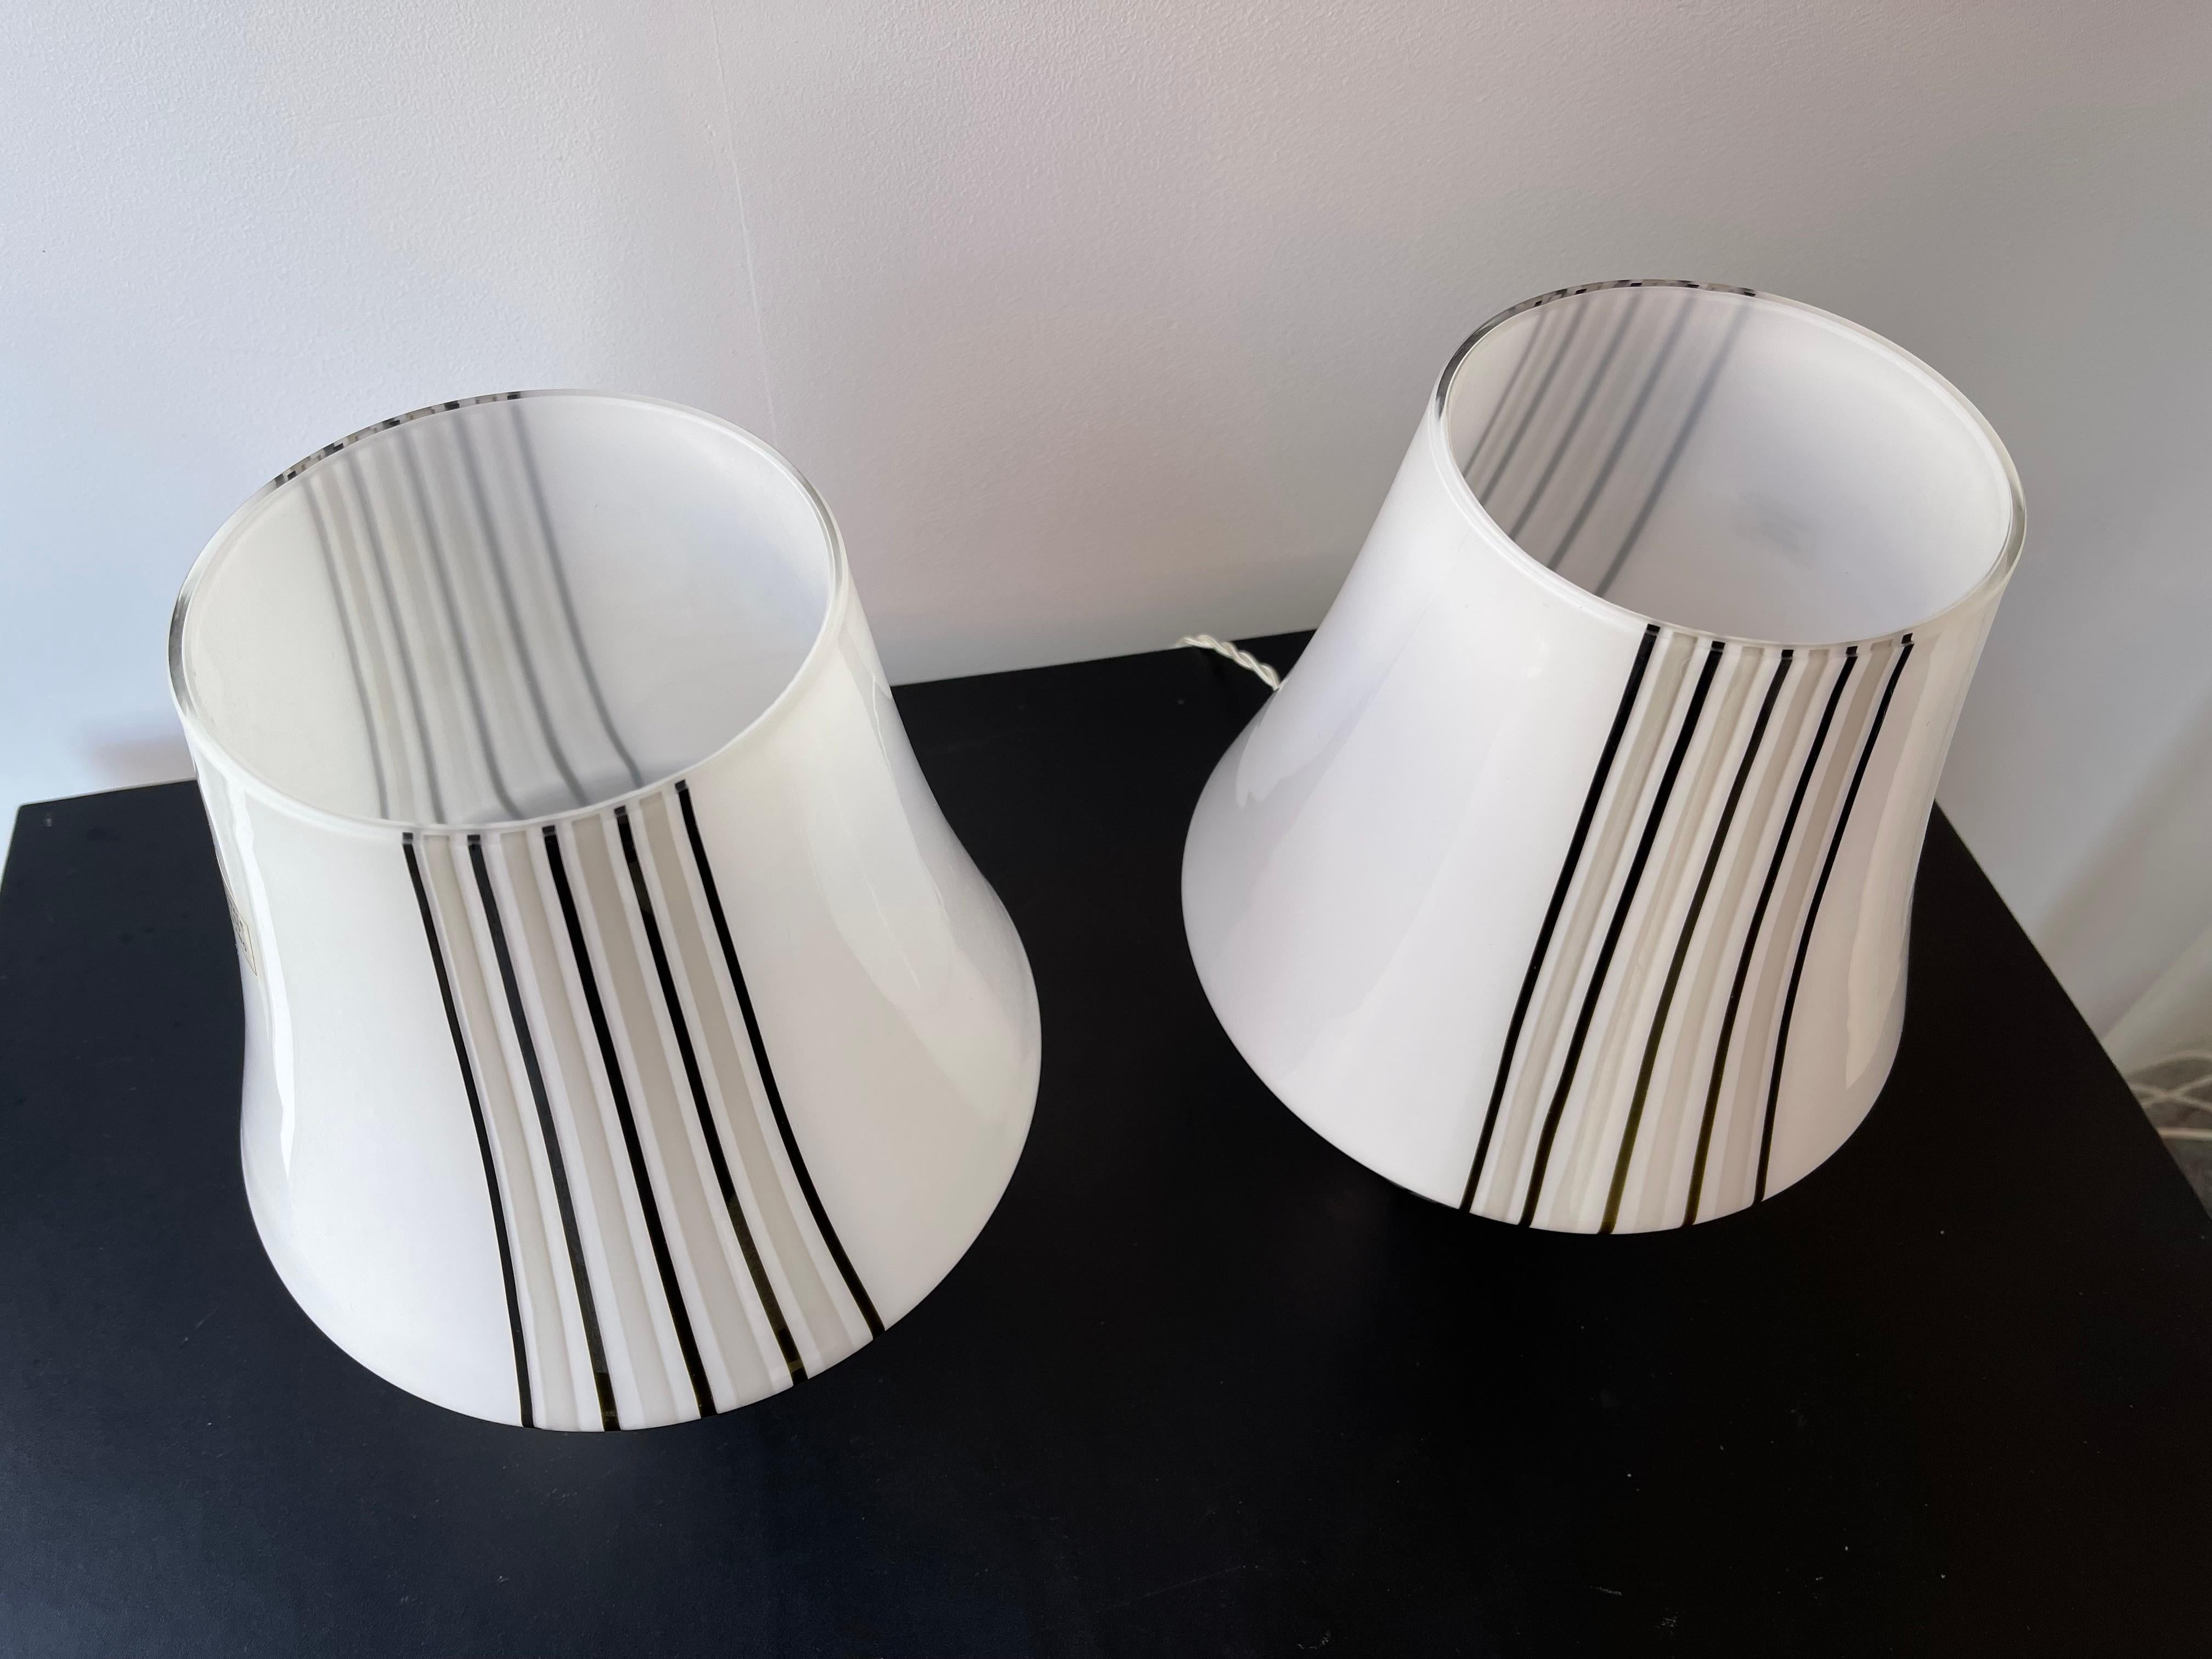 Pair of Stripe Murano Glass Lamps, Italy, 1970s For Sale 1